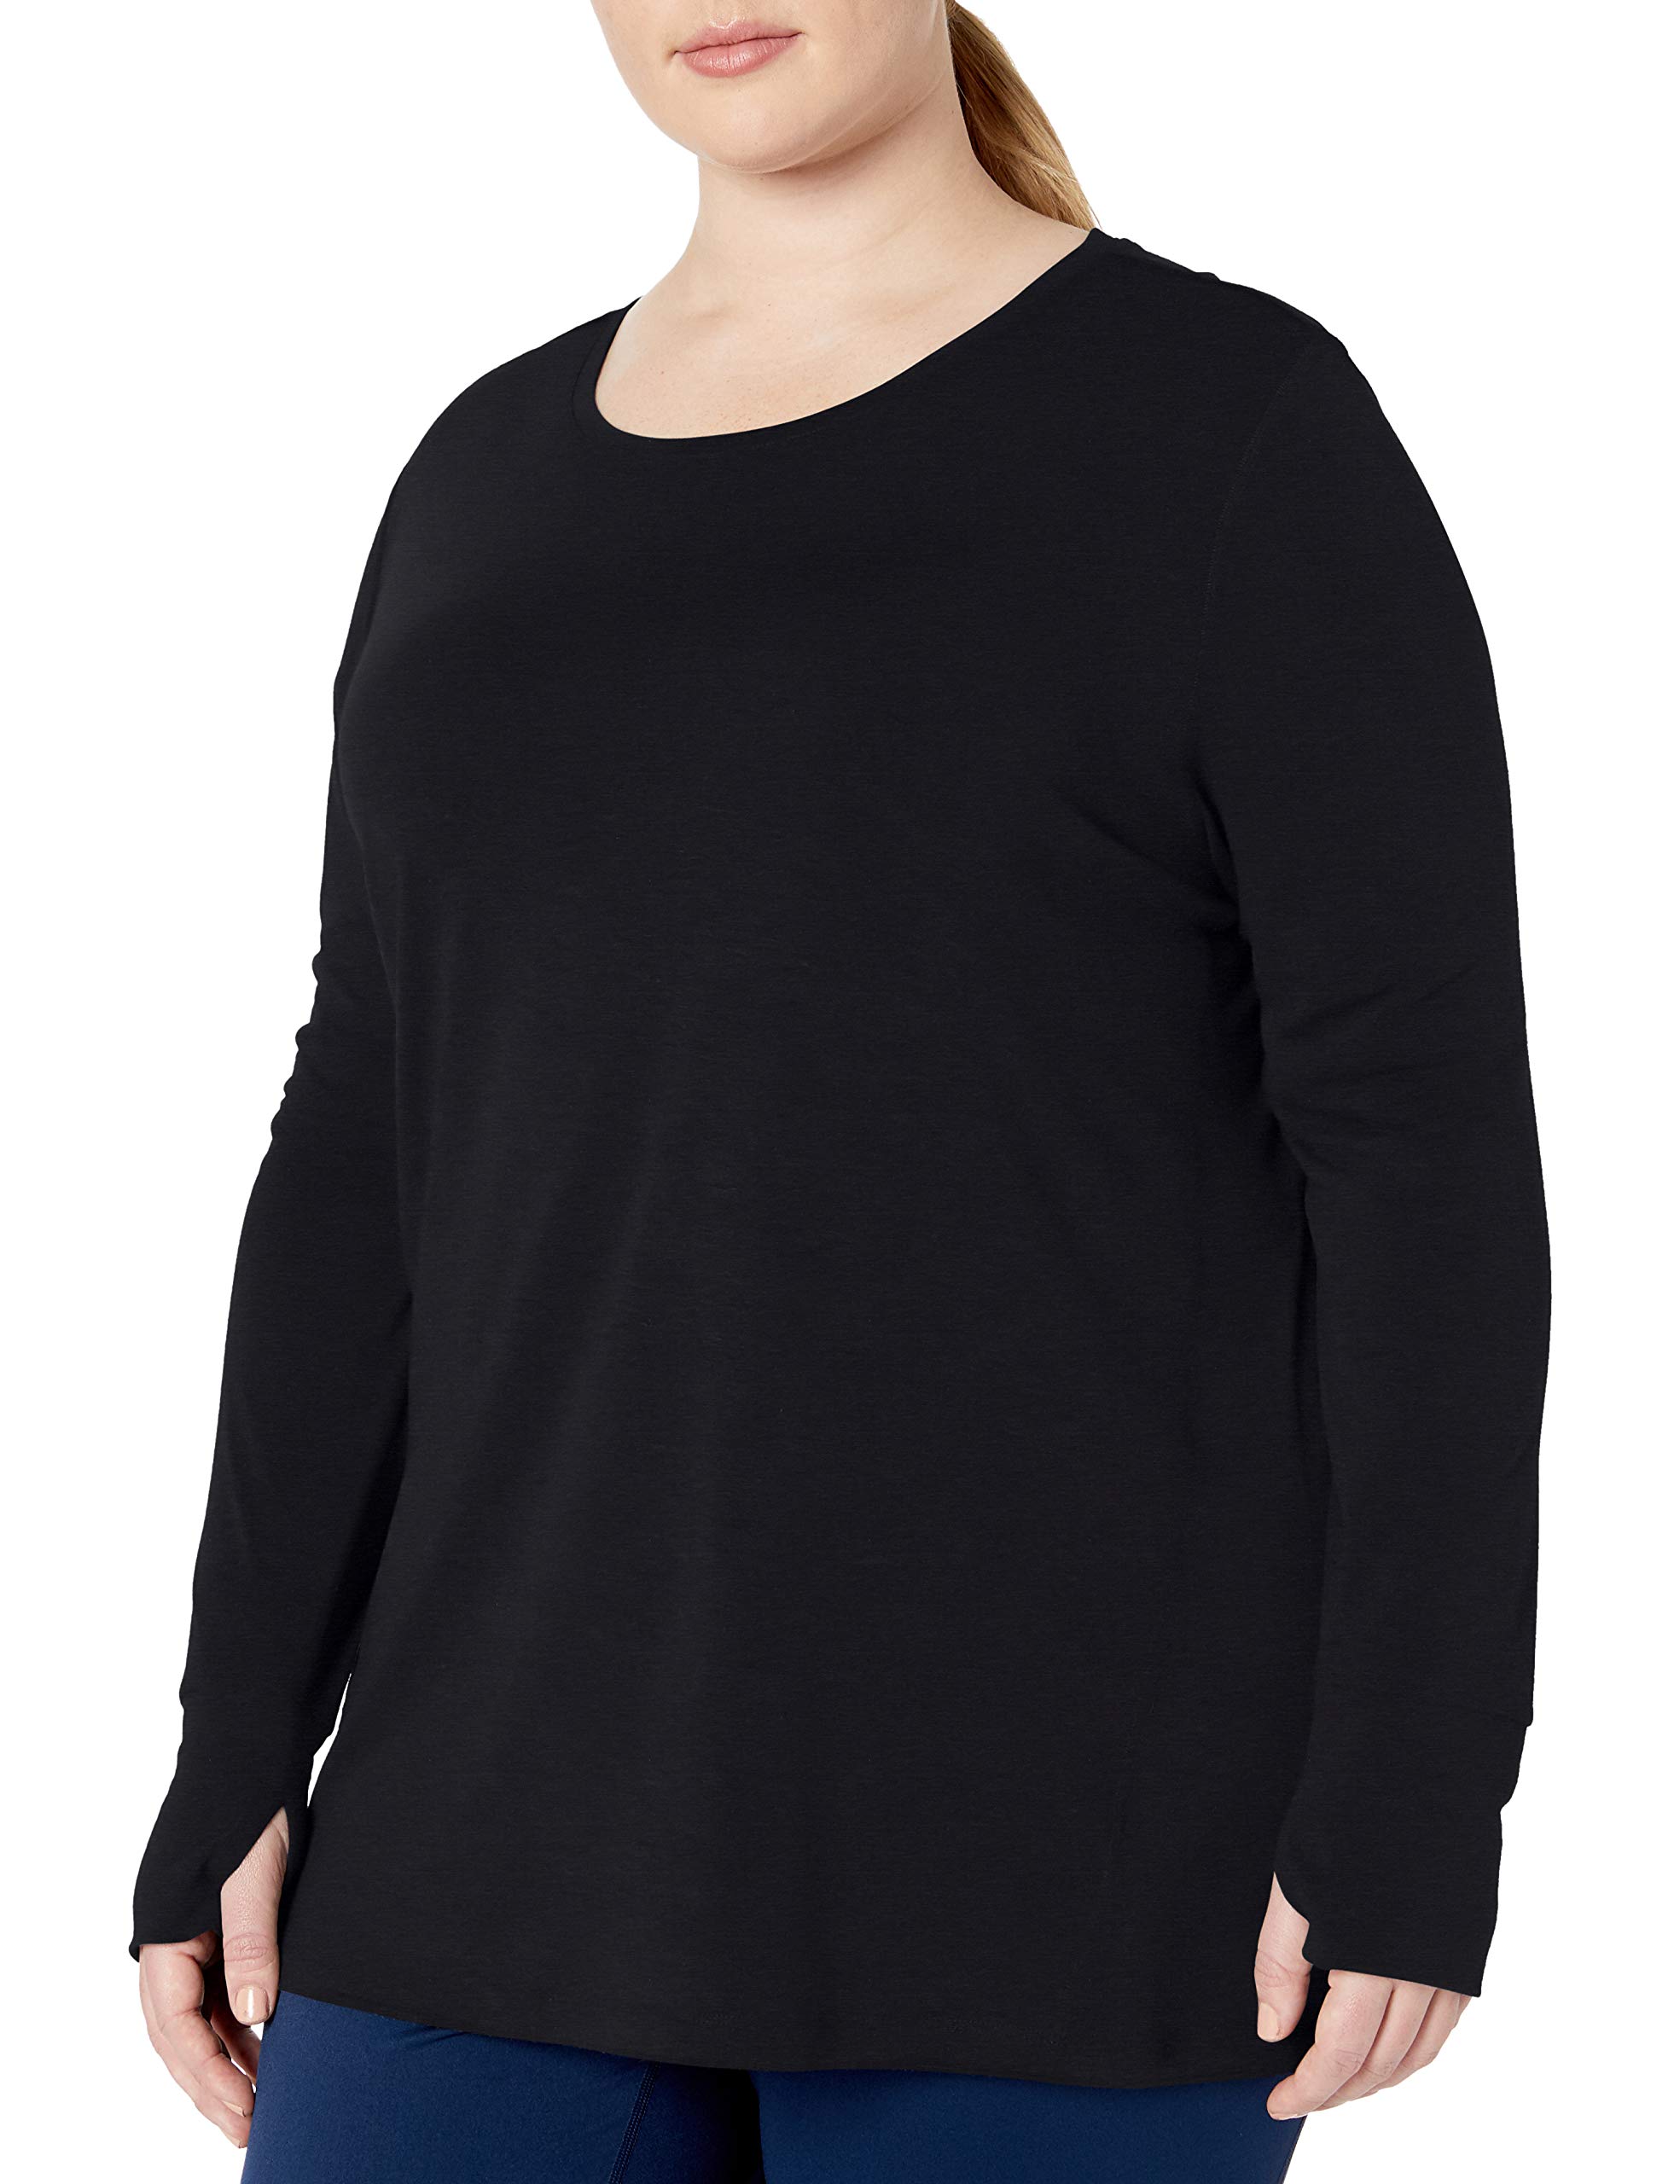 Amazon Essentials Women's Studio Relaxed-Fit Long-Sleeve Tee (Black, Sizes M-XL) $5.30 + Free Shipping w/ Prime or on $35+